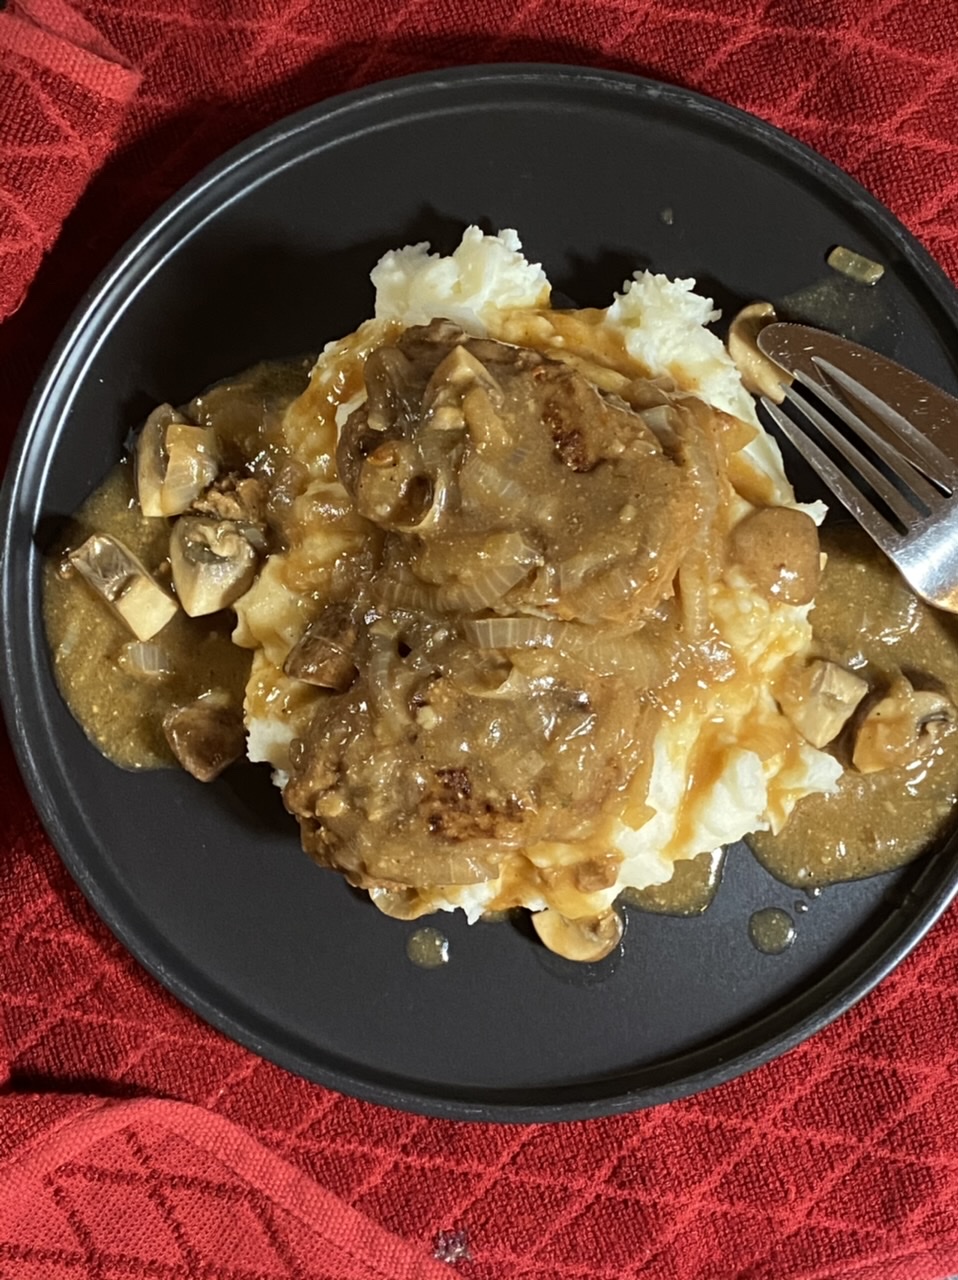 Salisbury steak and gravy over mashed potatoes on a black plate on top of a red towel